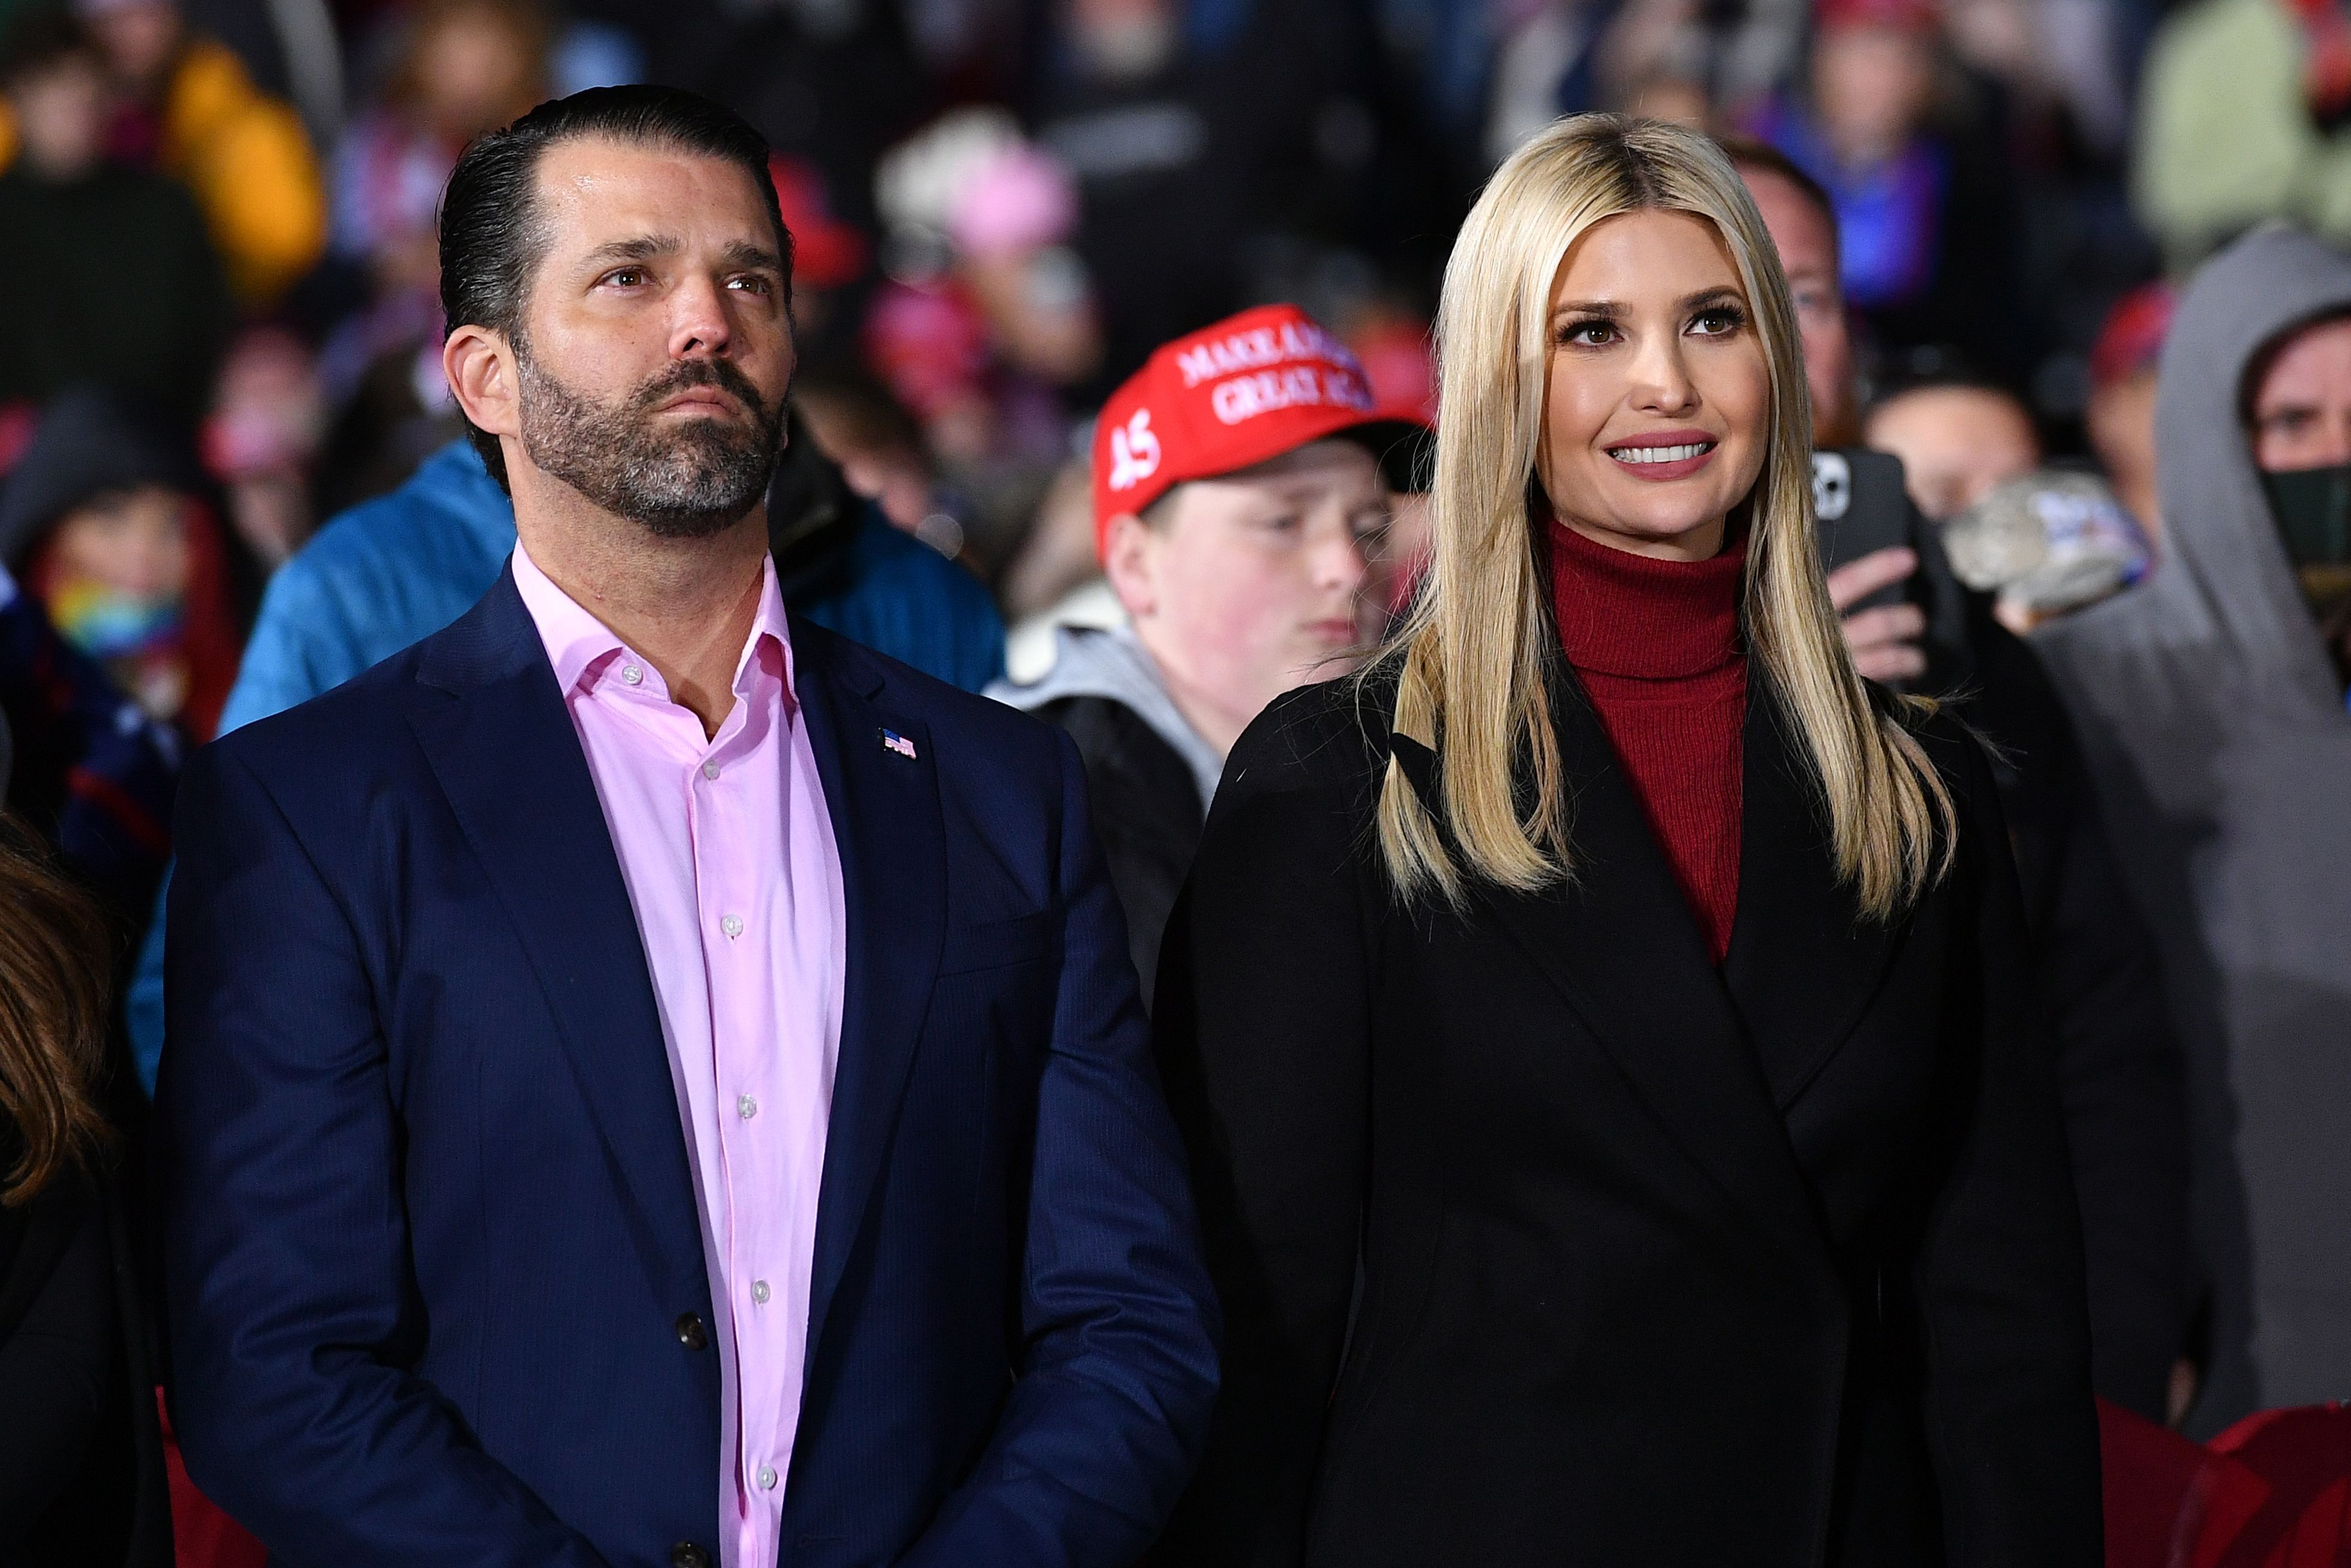 Senior advisor to the President Ivanka Trump (R) and brother Donald Trump Jr. listens during a rally in Georgia